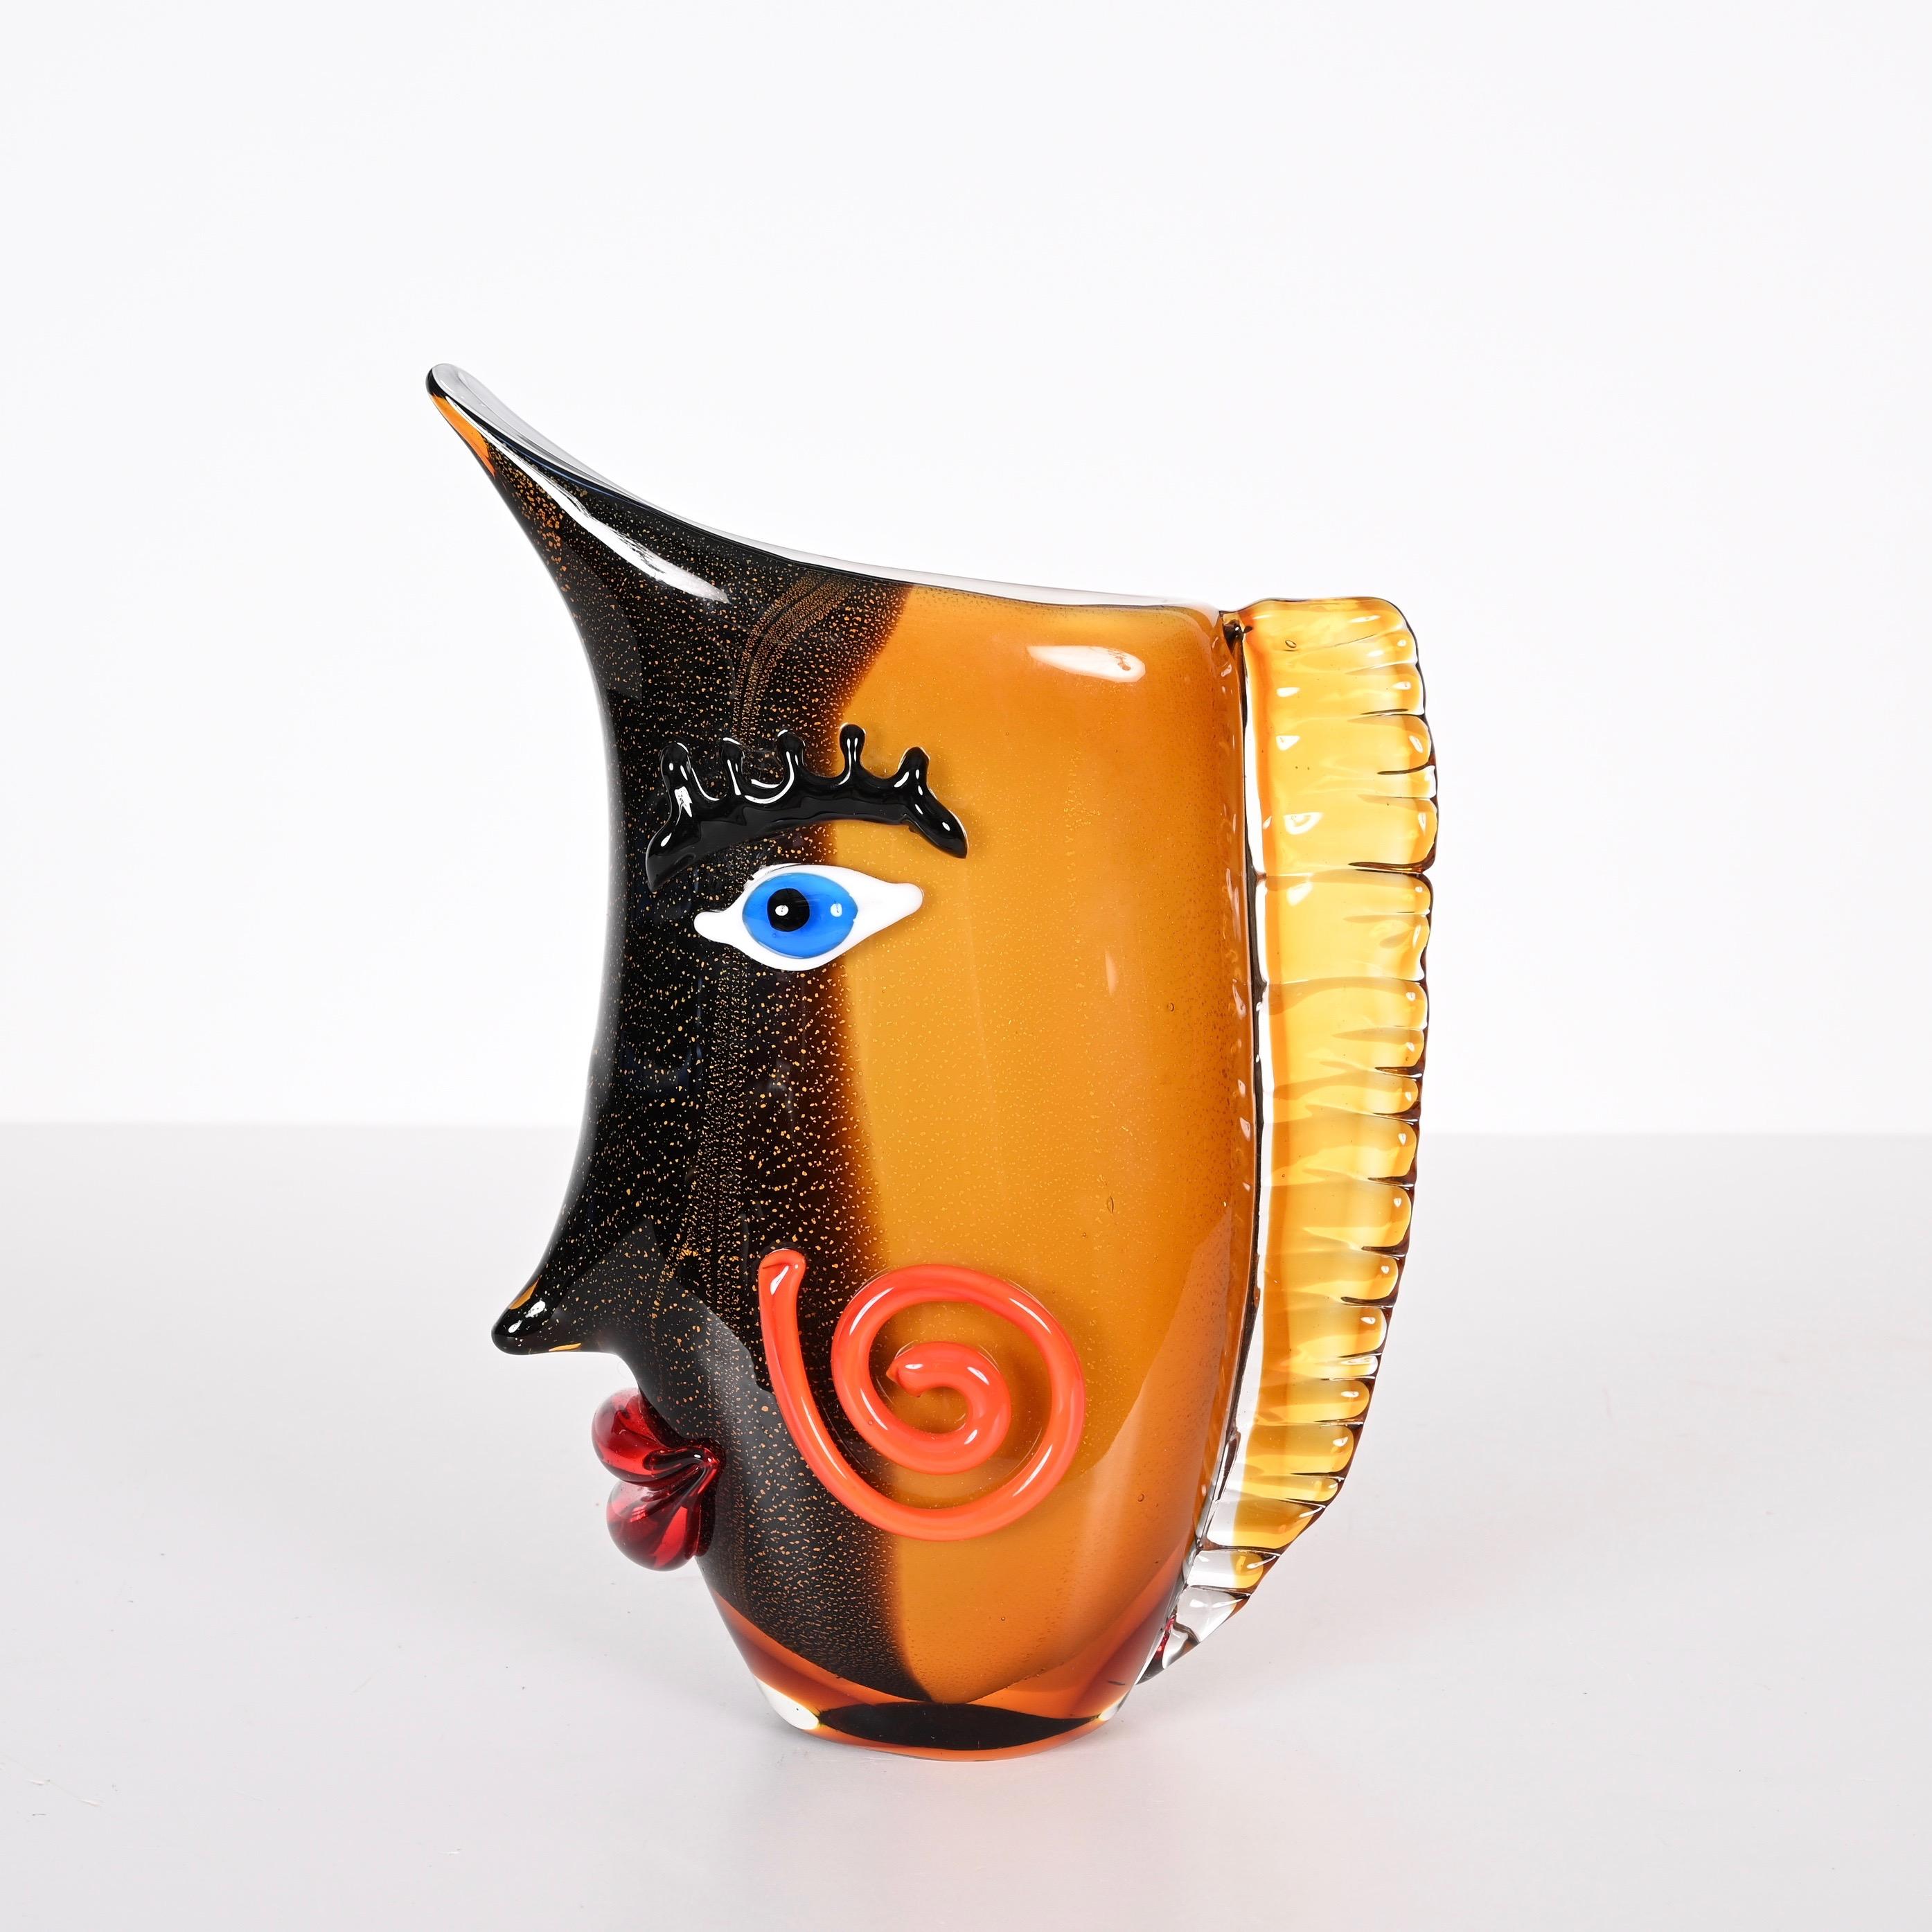 Mario Badioli after Picasso Black and Orange Sommerso Murano Glass Vase, 1980s For Sale 1